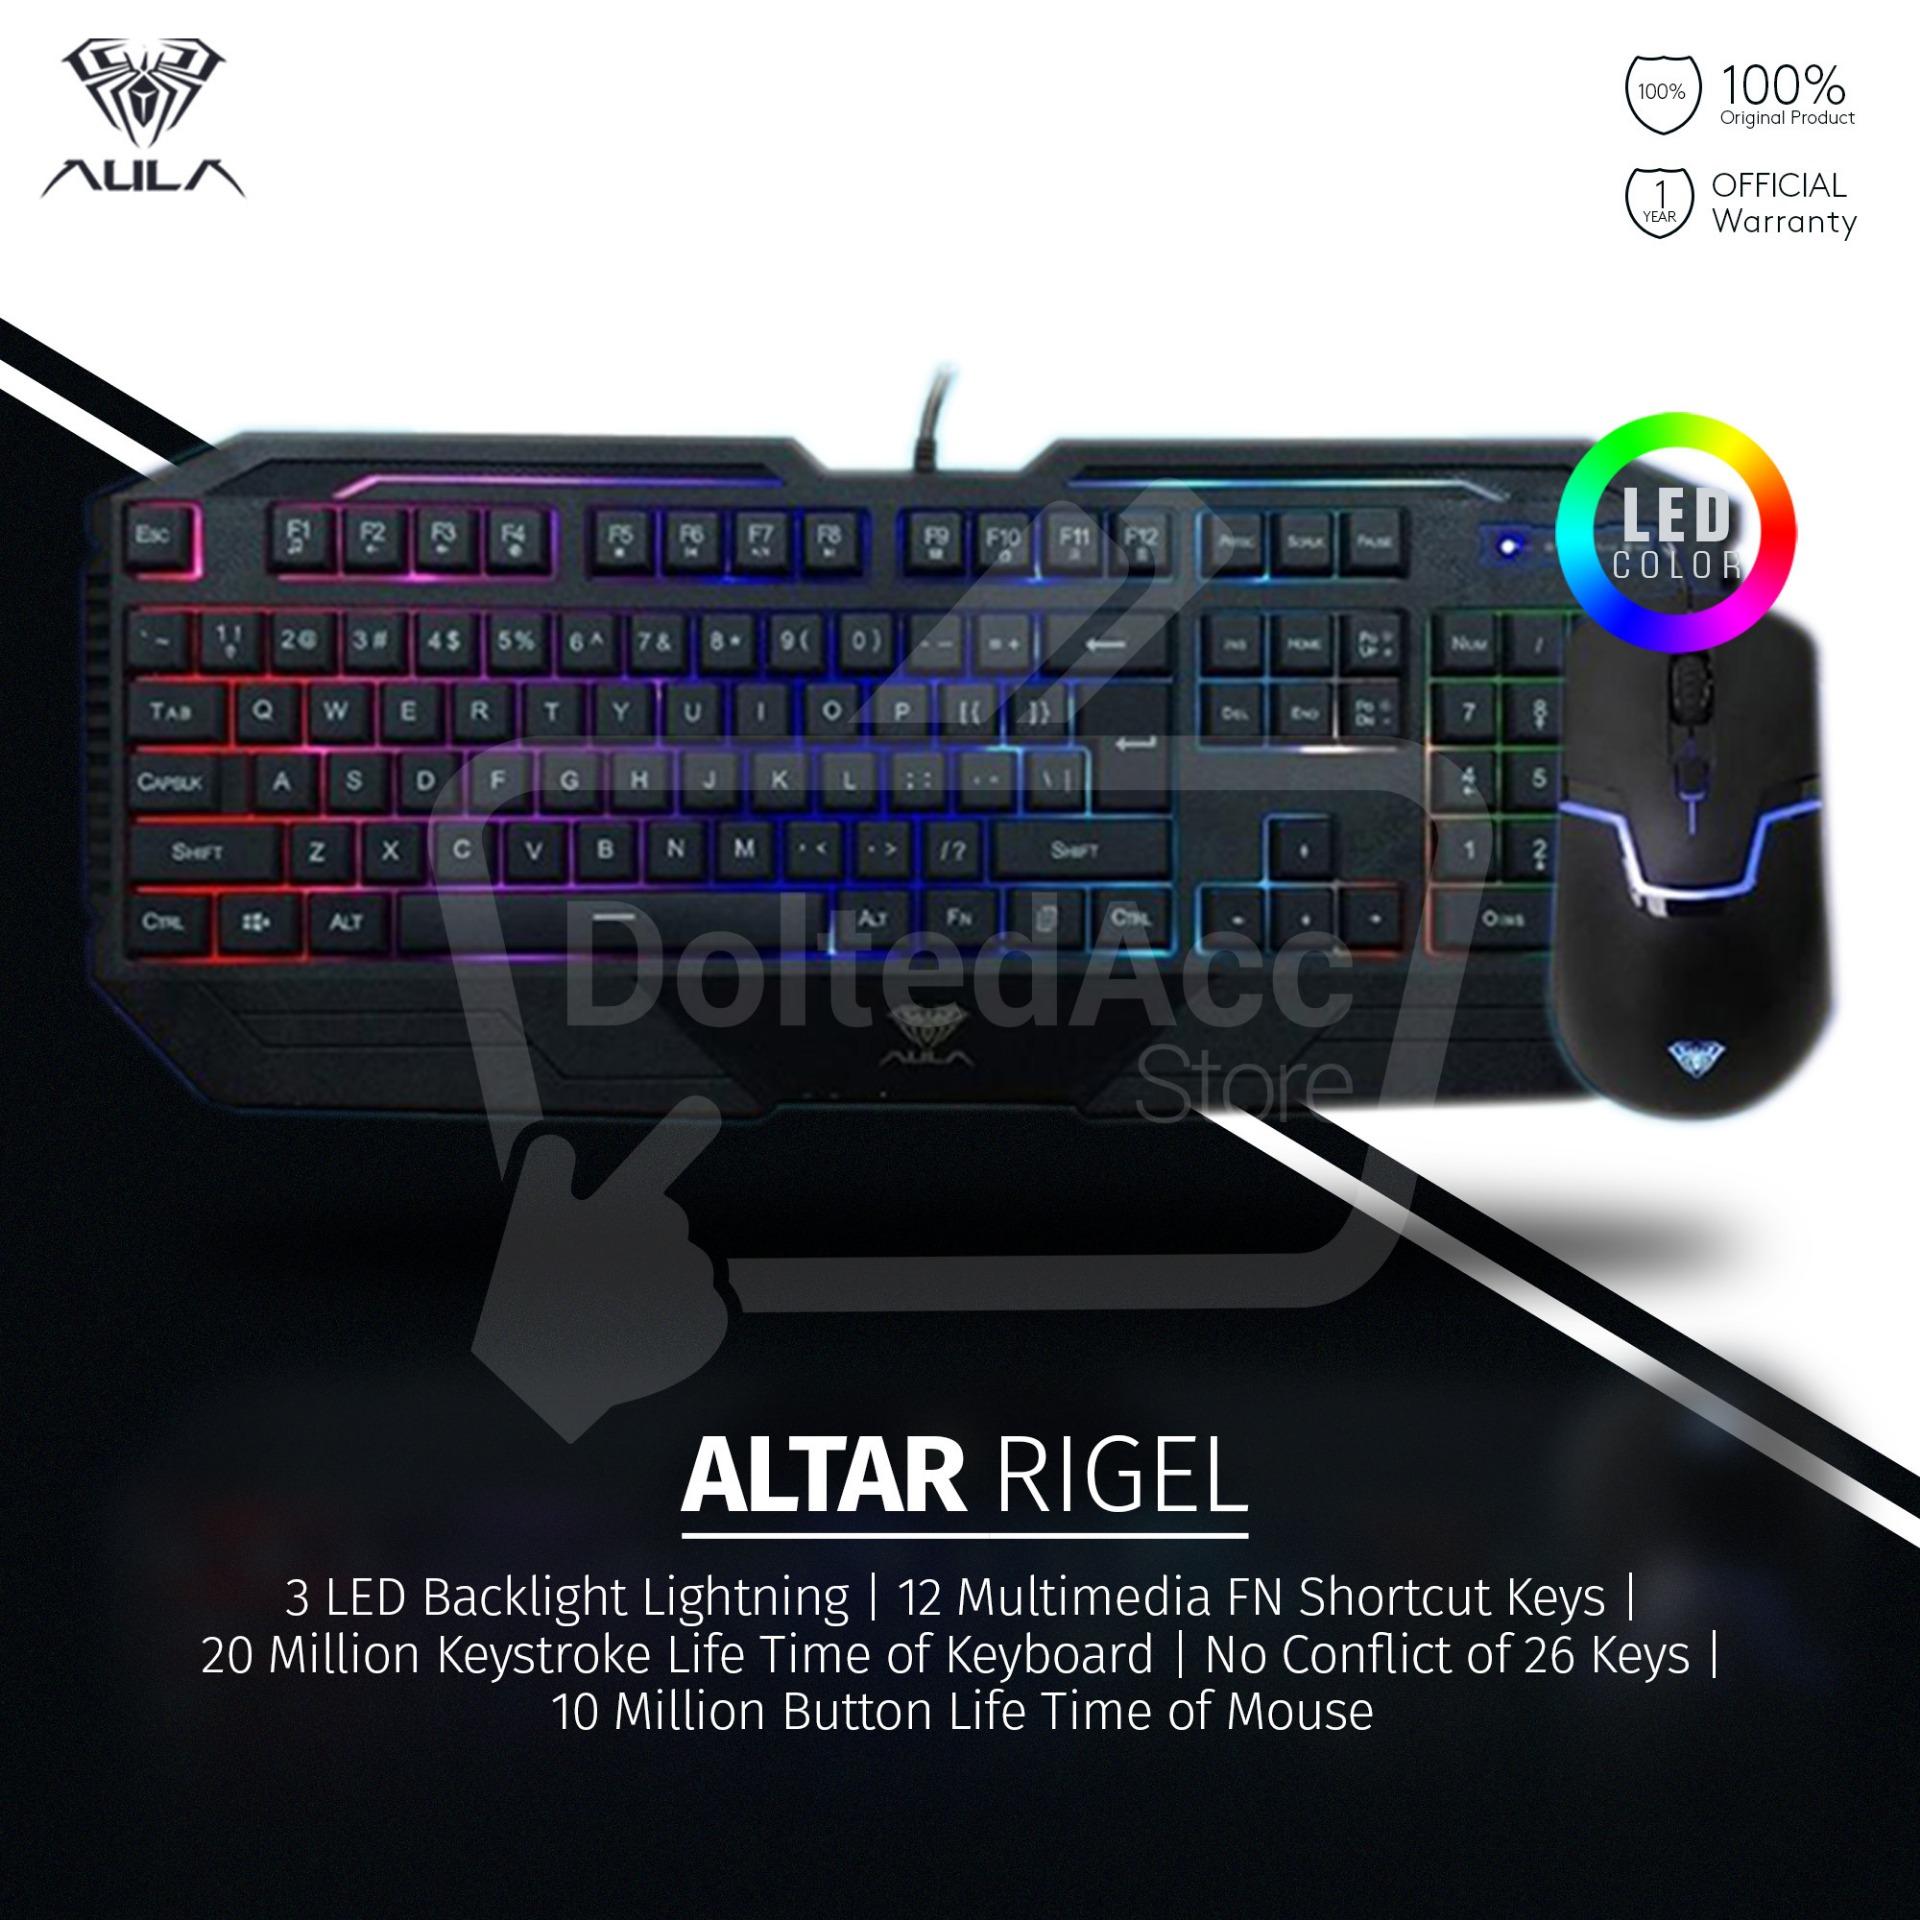 AULA ALTAR RIGEL Wired Keyboard and Mouse Combo with LED Backlit - Hitam